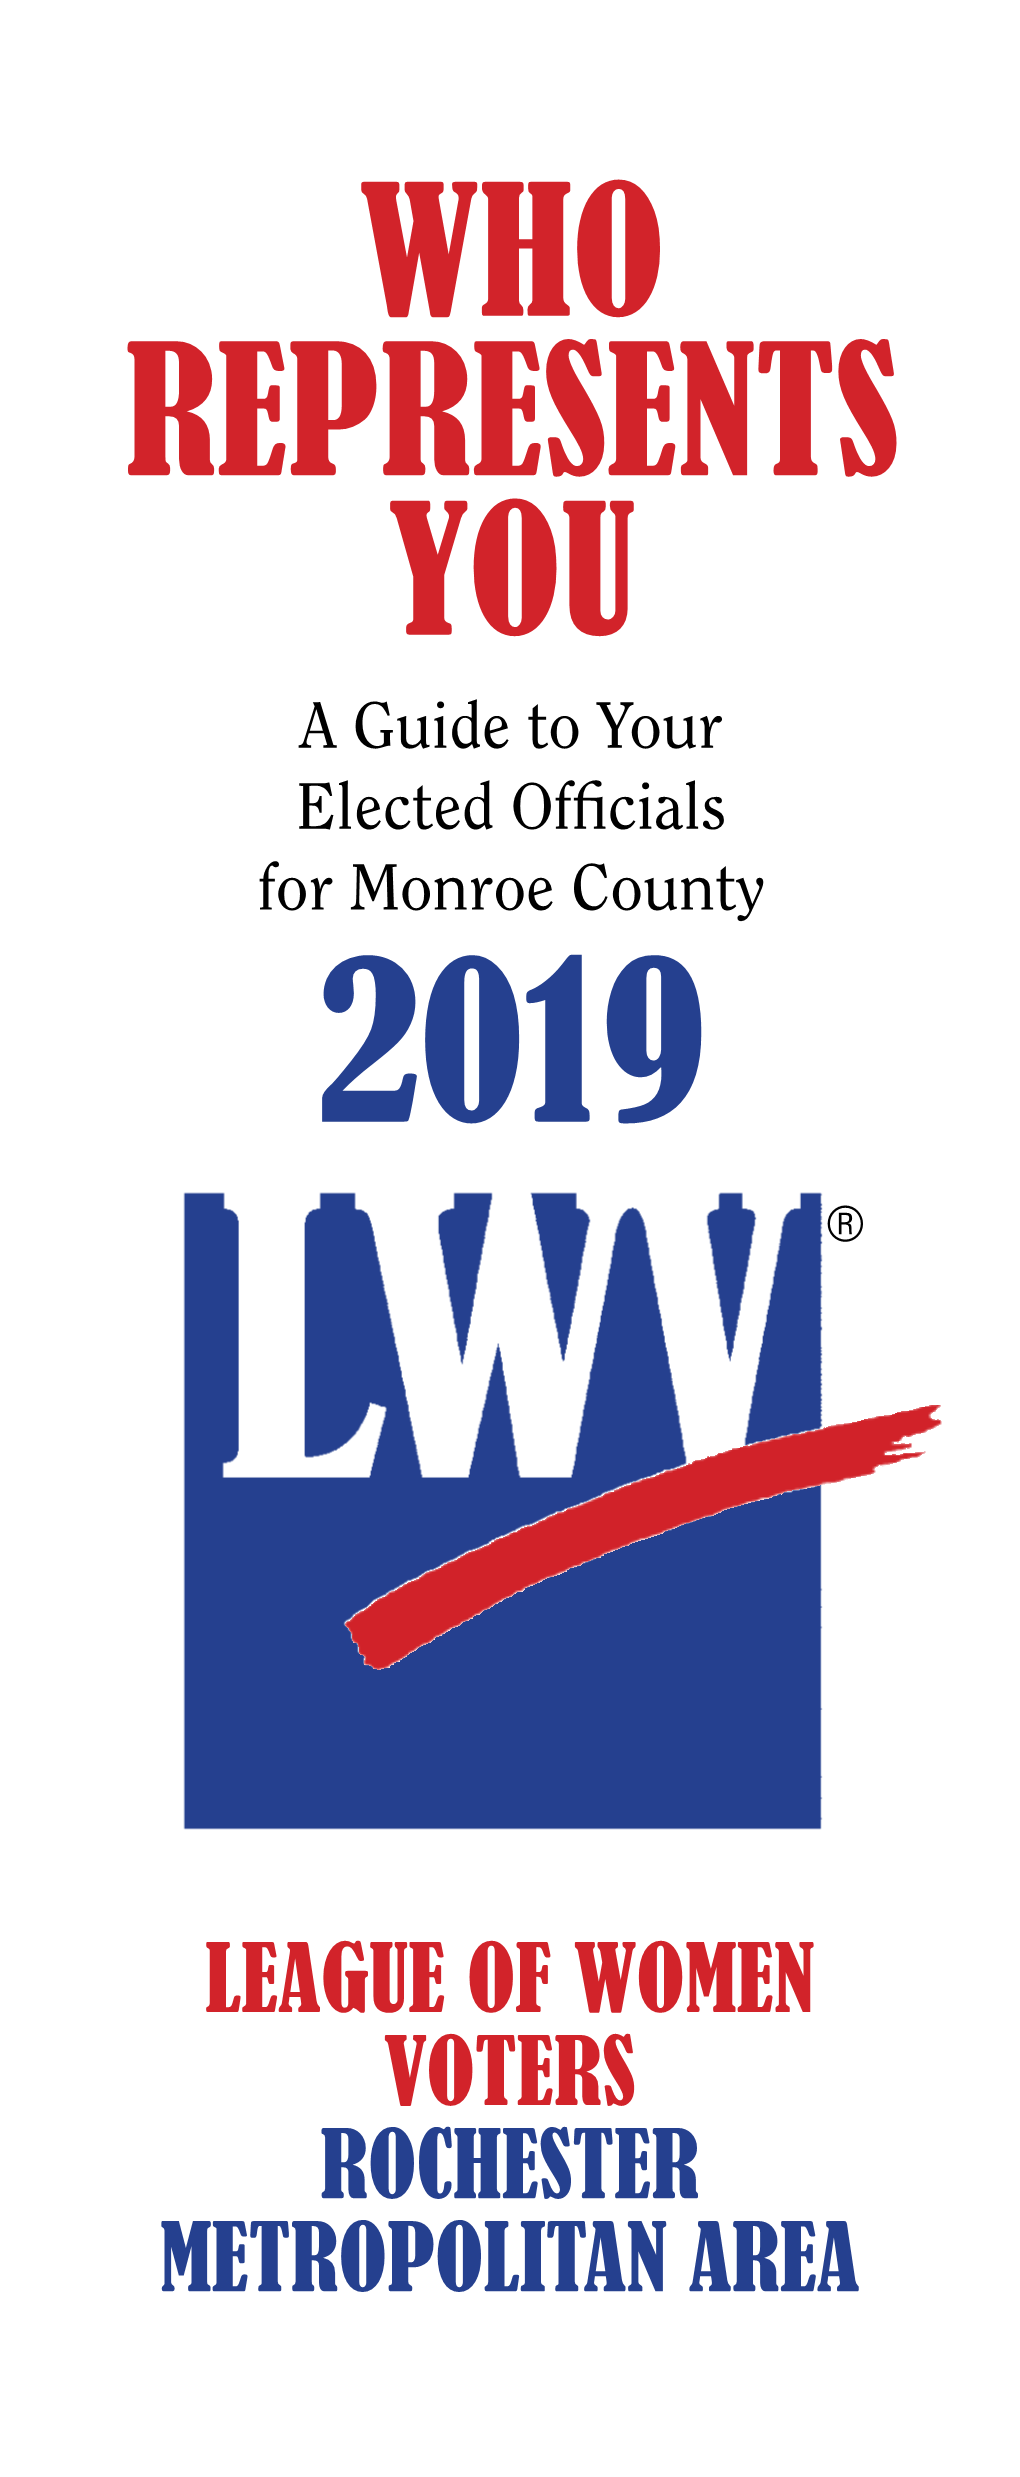 WHO REPRESENTS YOU a Guide to Your Elected Officials for Monroe County 2019 ®